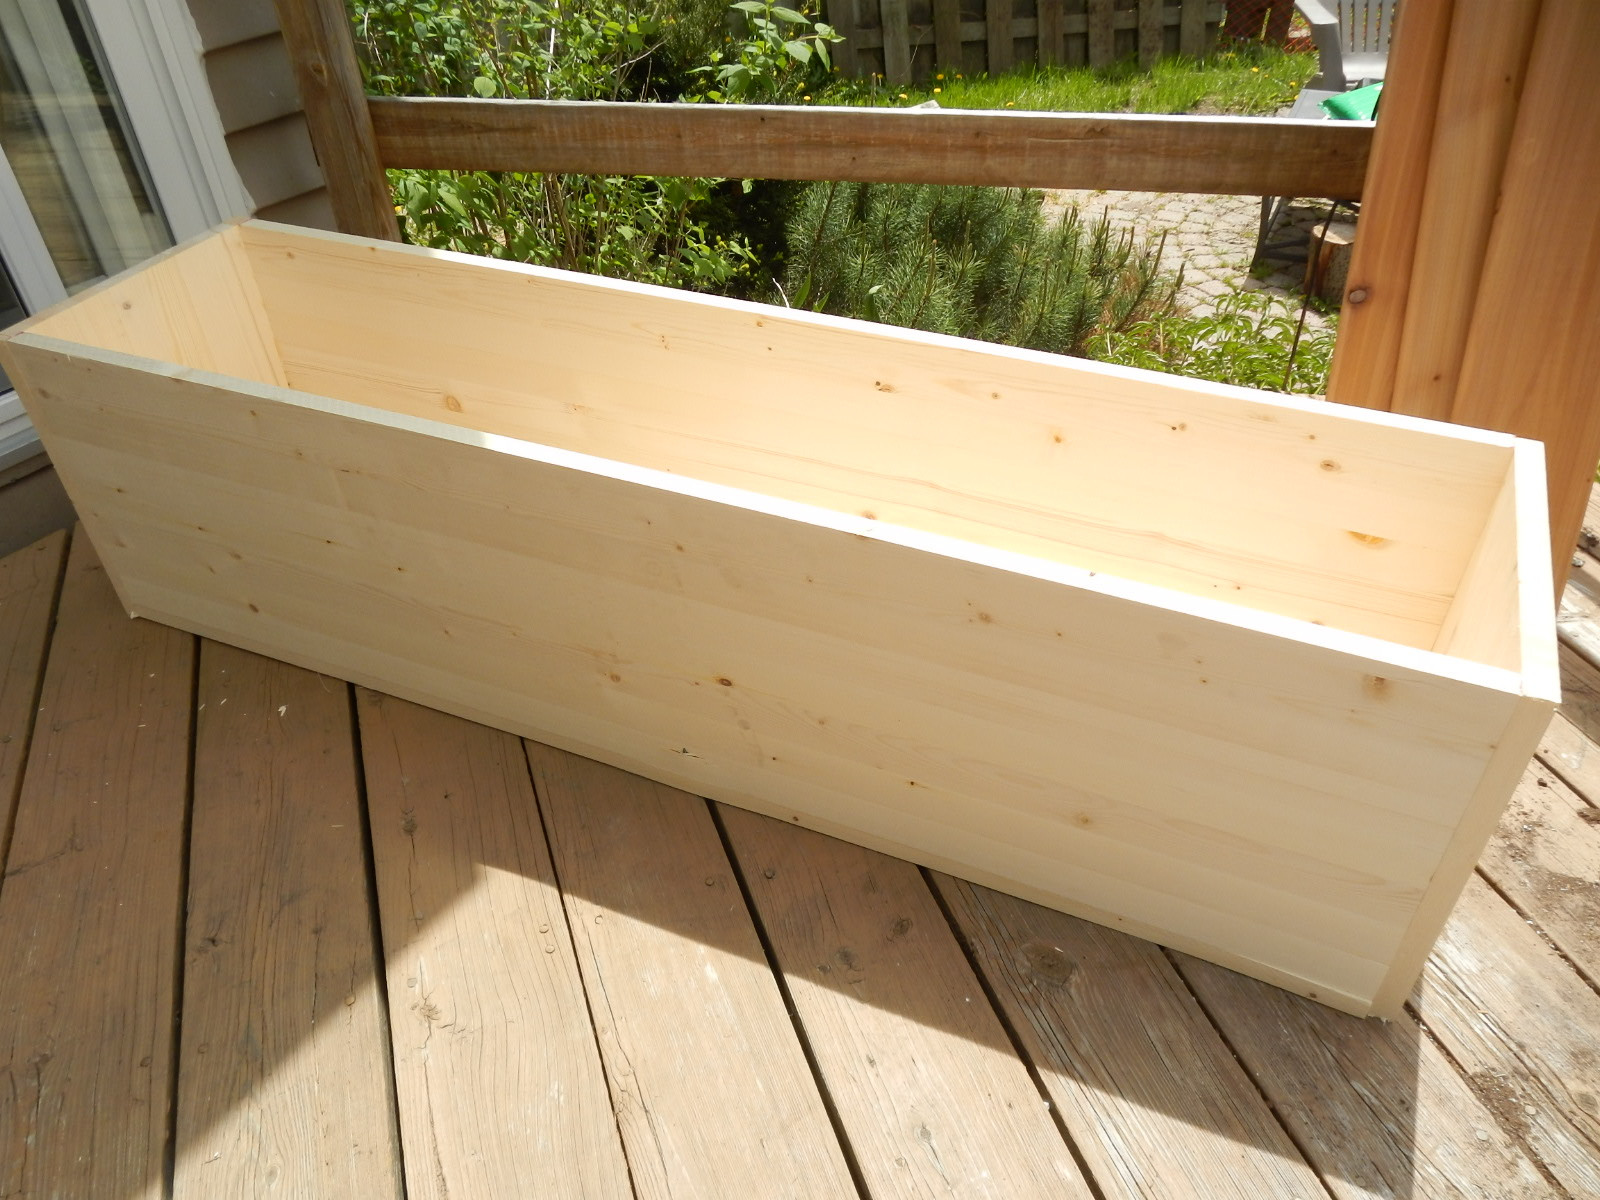 DIY Wooden Flower Box
 Planting for Privacy – DIY Wood Planter